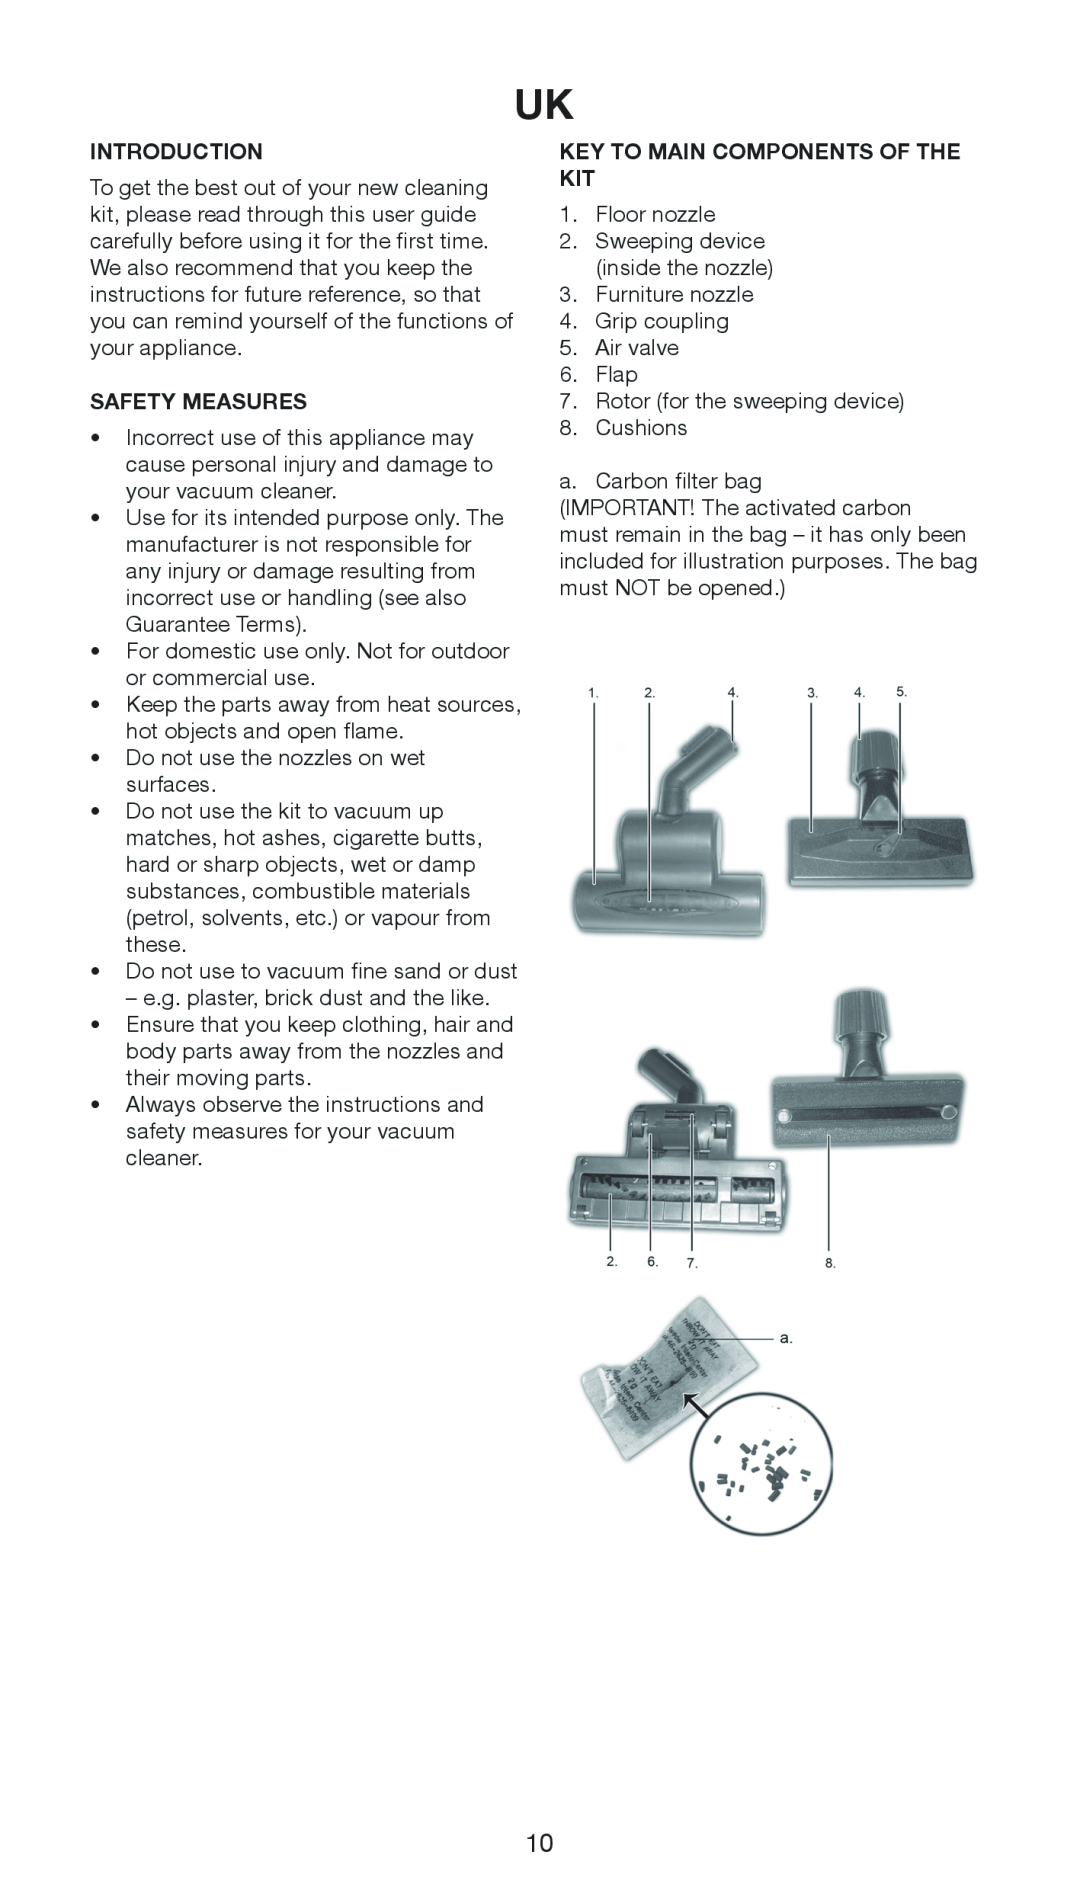 Melissa 640-150 manual Introduction, Safety Measures, Key To Main Components Of The Kit 